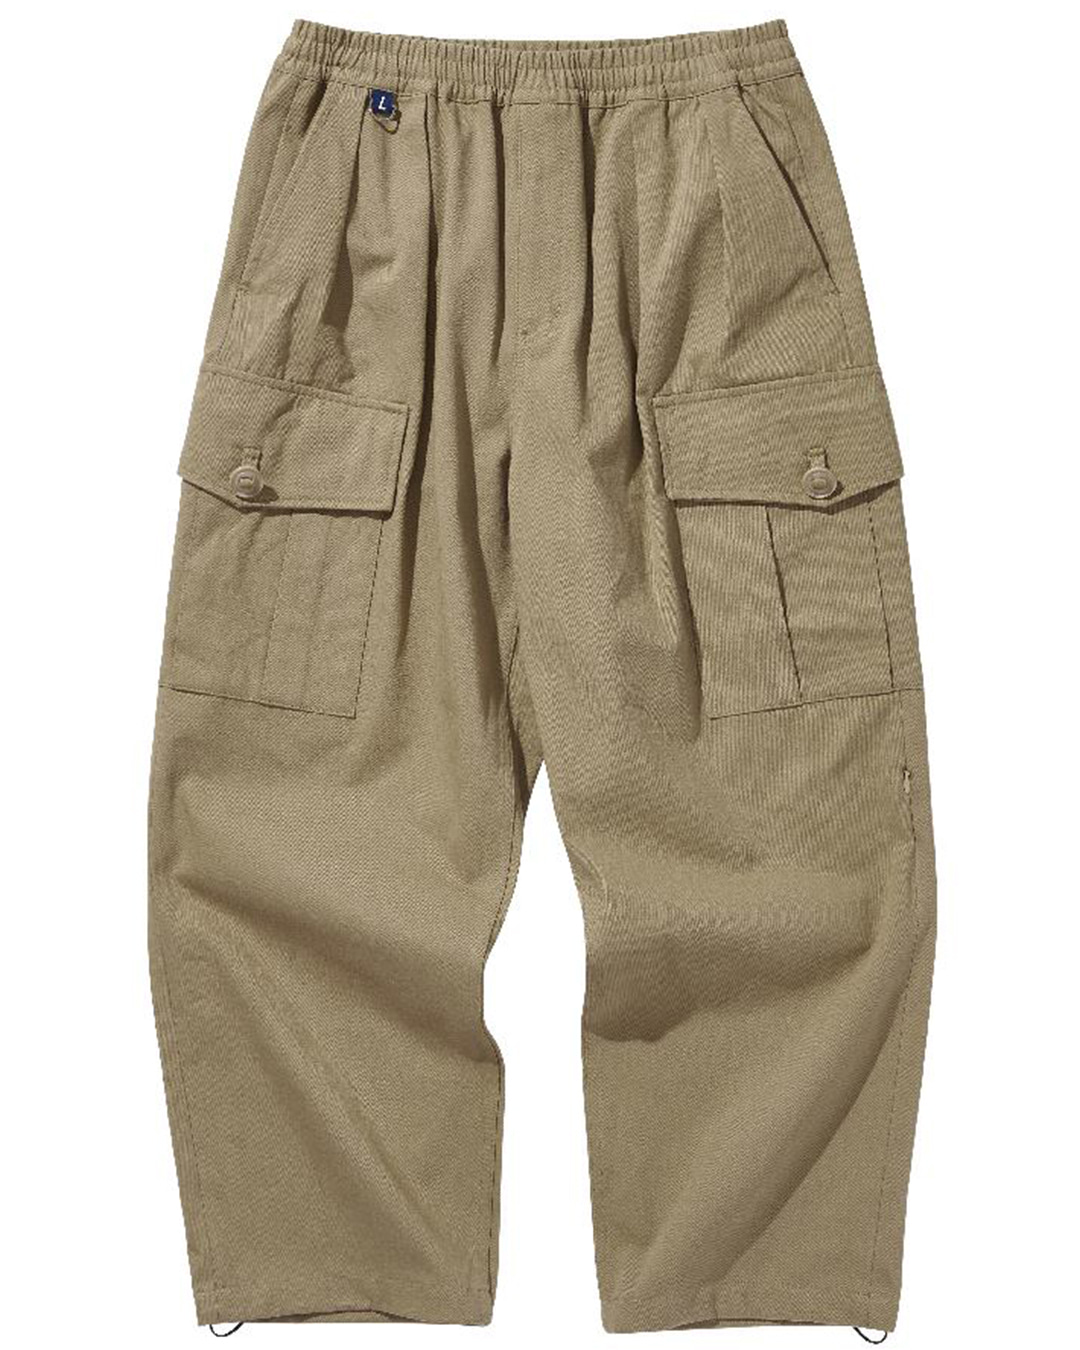 WIDE EASY CARGO PANTS / BROWN,BTS,JAPAN,FASHIONBRAND,LIBERE